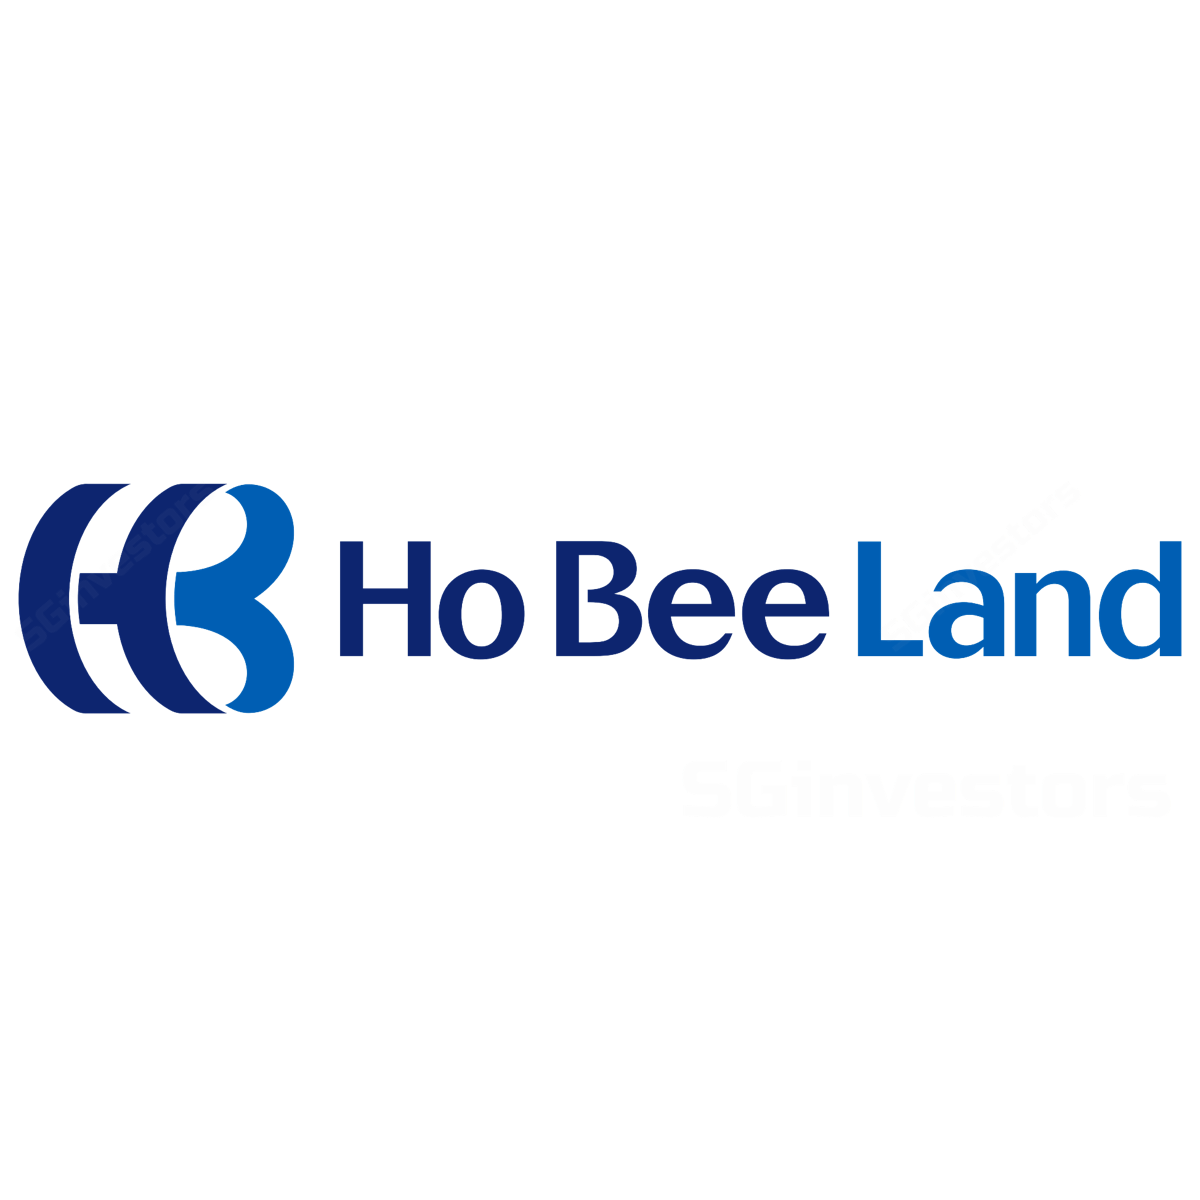 Ho Bee Land (HOBEE) - Maybank Kim Eng Research 2018-07-06: Diversification Pays Off